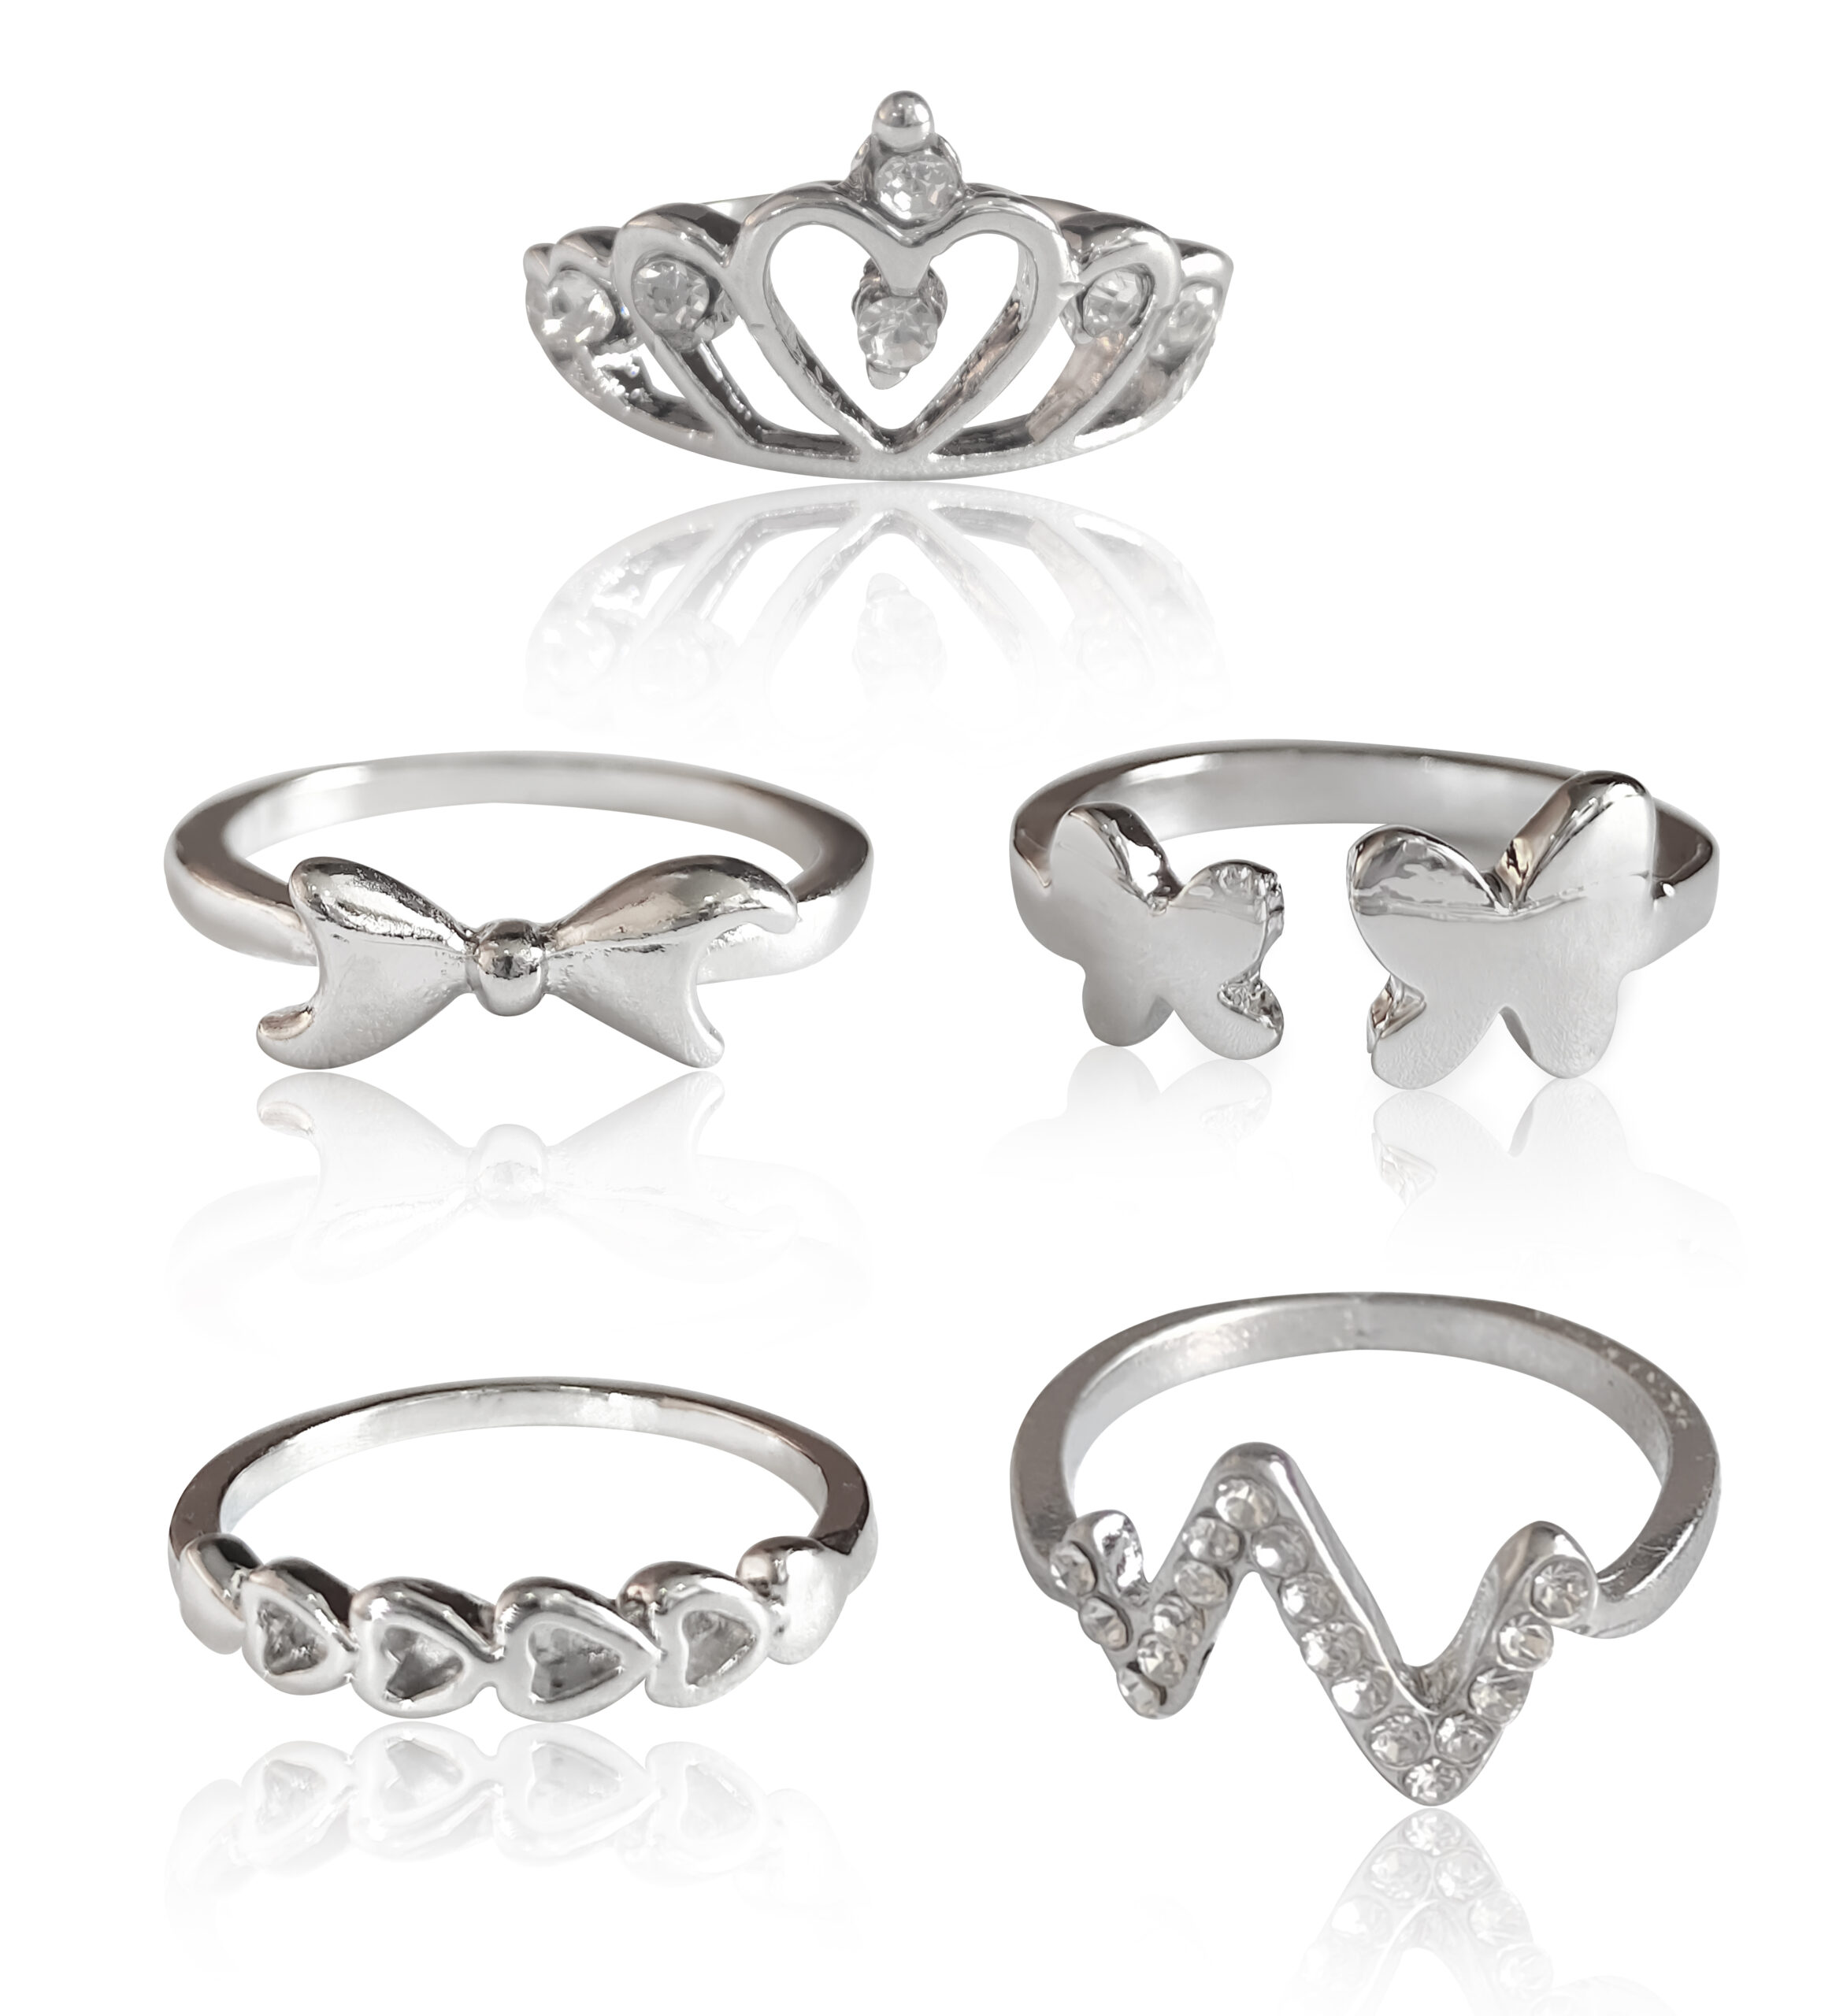 Buy Stylish Teens Stylish Flower Design Adorable Adjustable Silver Rings  For Women & Girls With Rose Box Packing Online at Low Prices in India -  Paytmmall.com